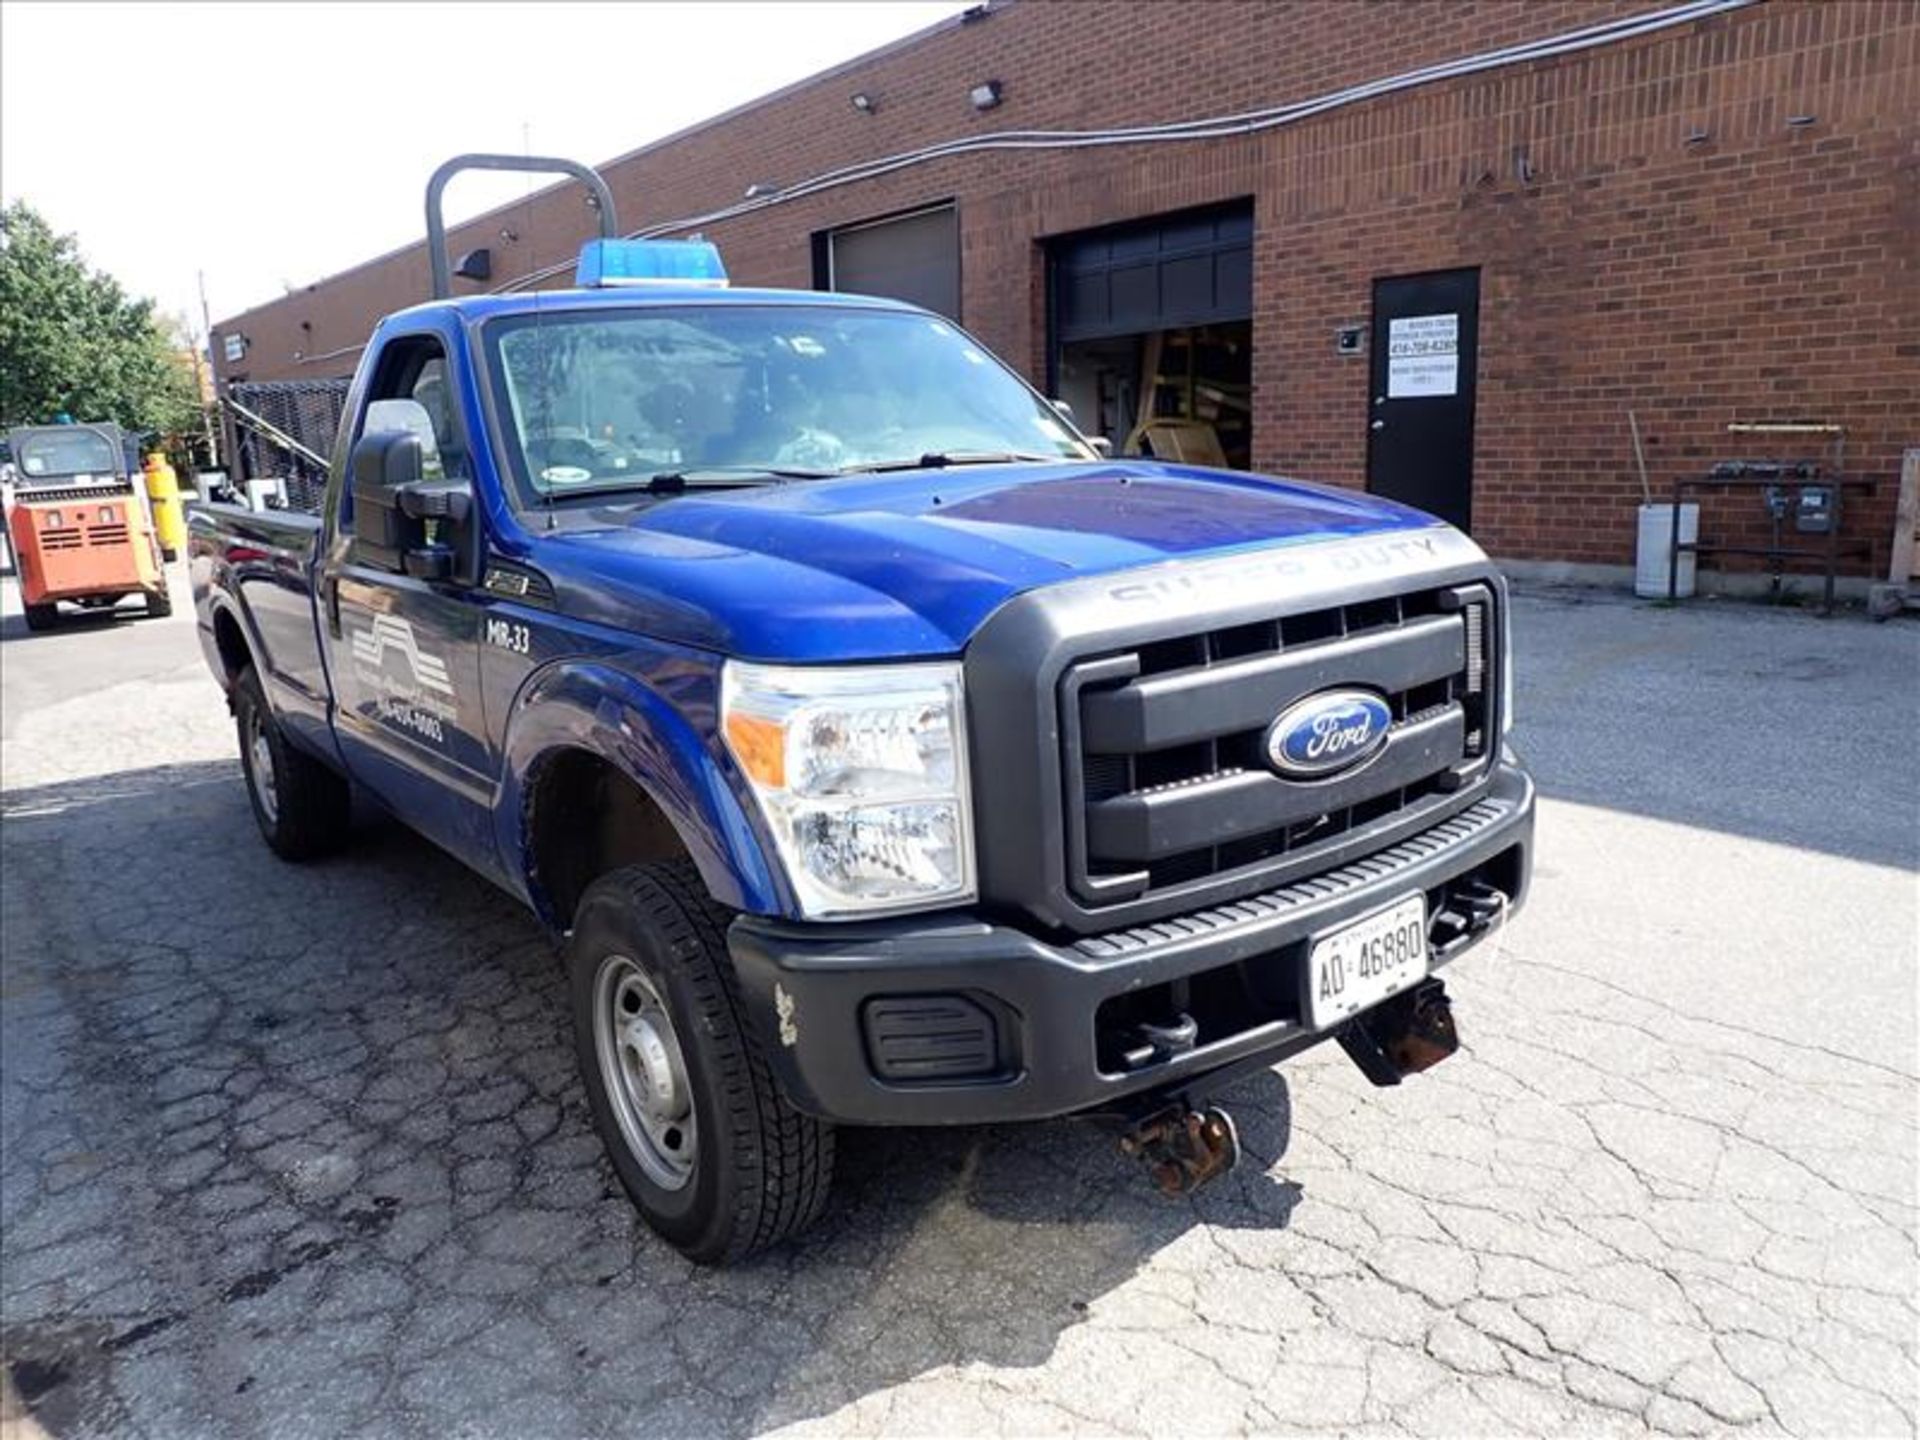 2012 Ford F-250 SD Super Duty XL Pick Up Truck, 83230 km, 6.2L engine, 4WD, automatic transmission - Image 3 of 11